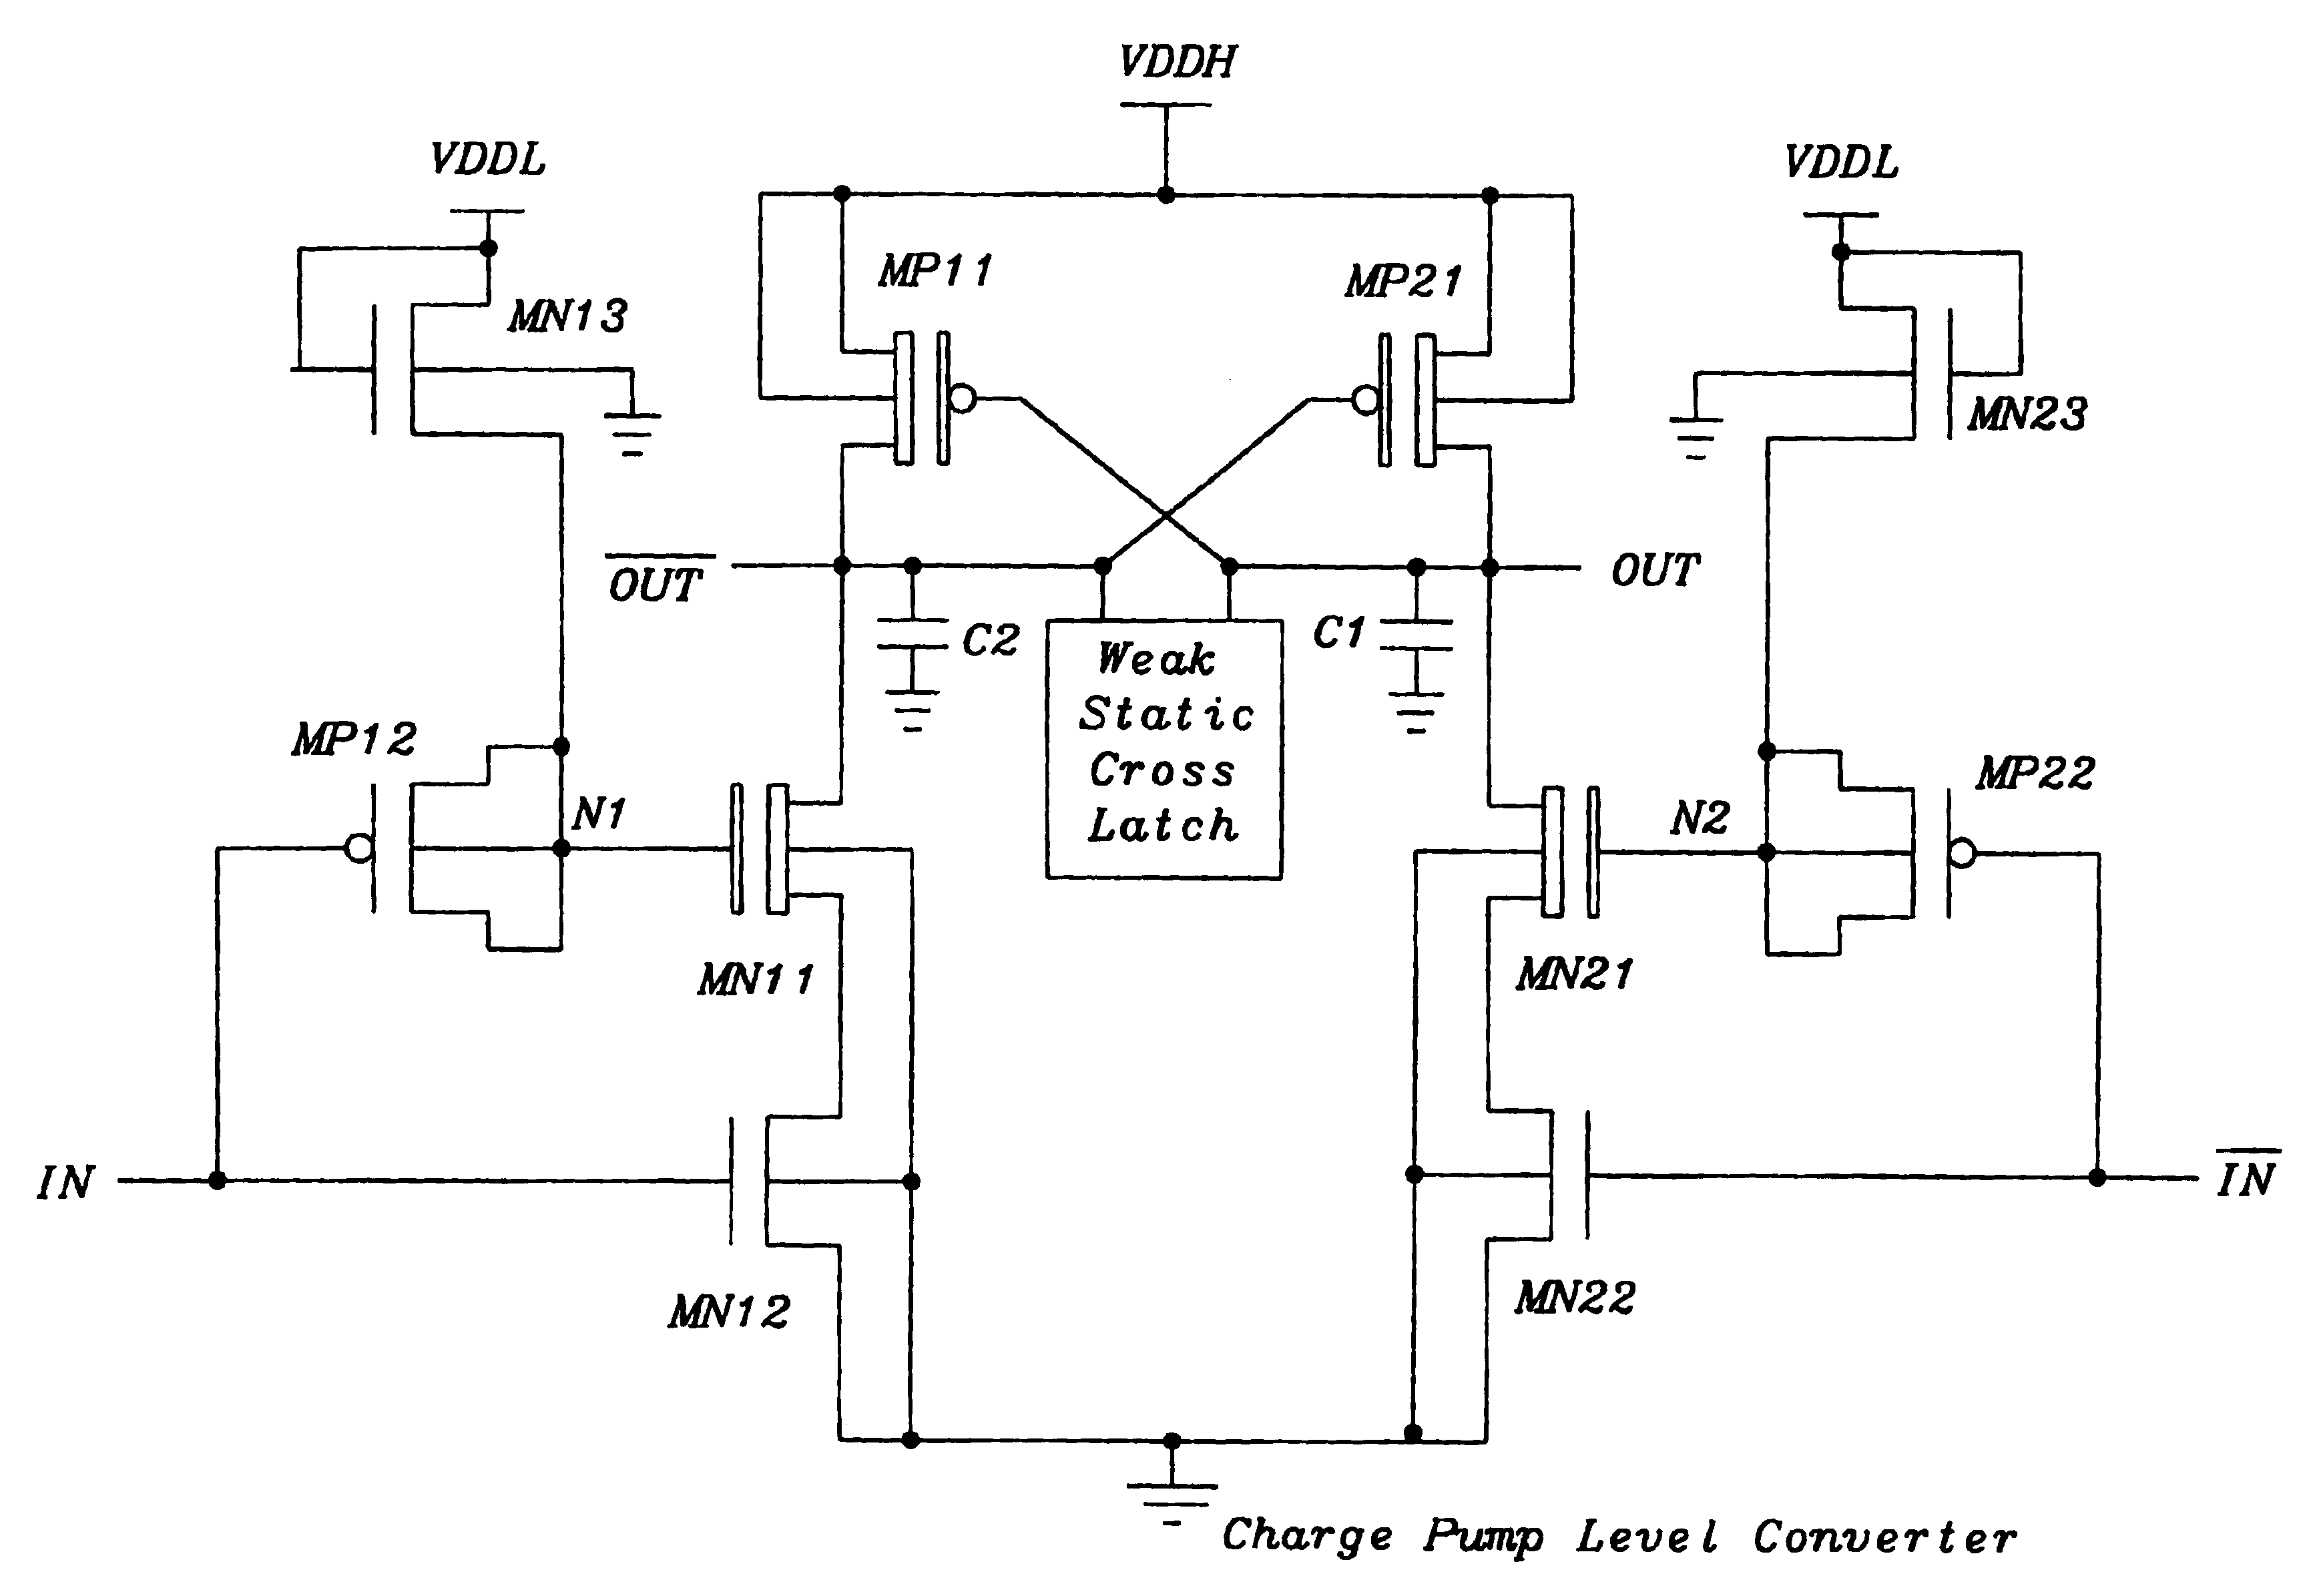 Charge pump level converter (CPLC) for dual voltage system in very low power application